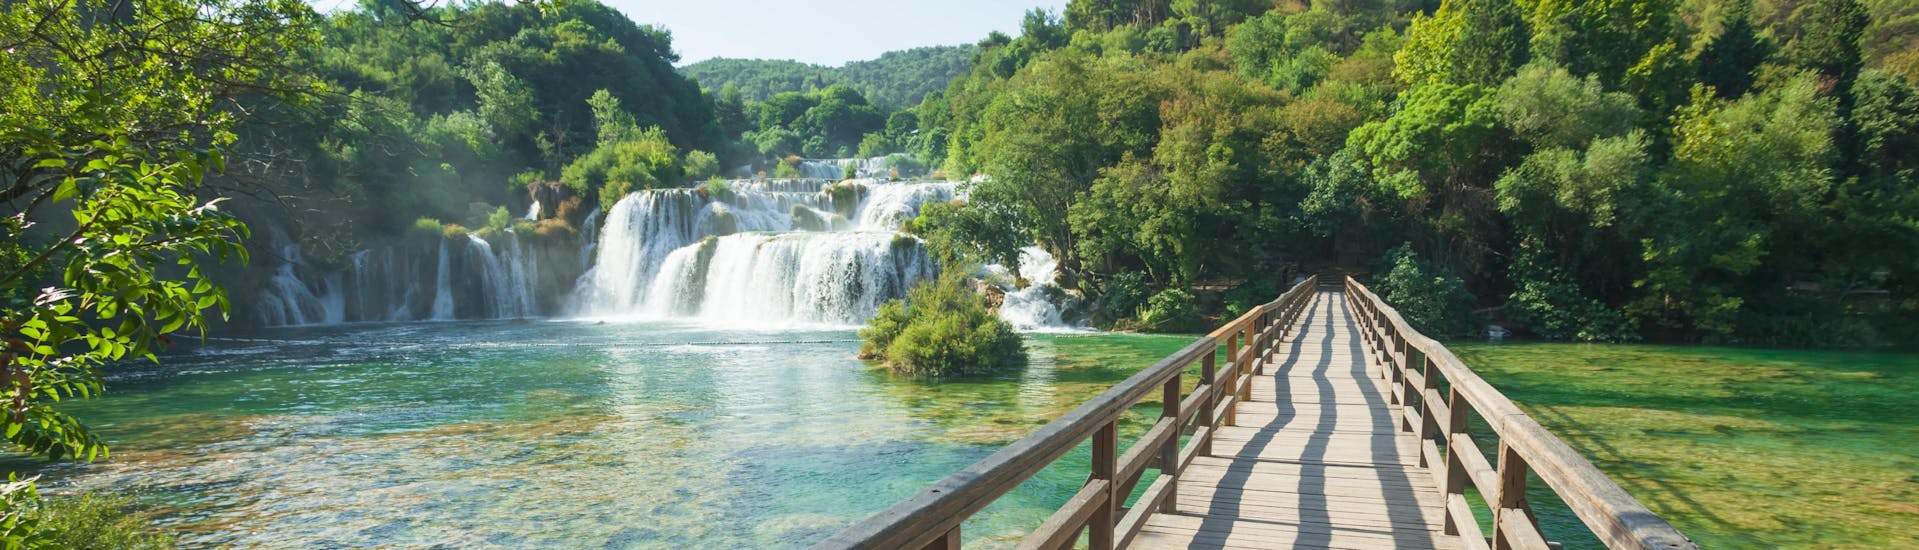 Picture of the famous waterfalls of Krka National Park in Croatia.